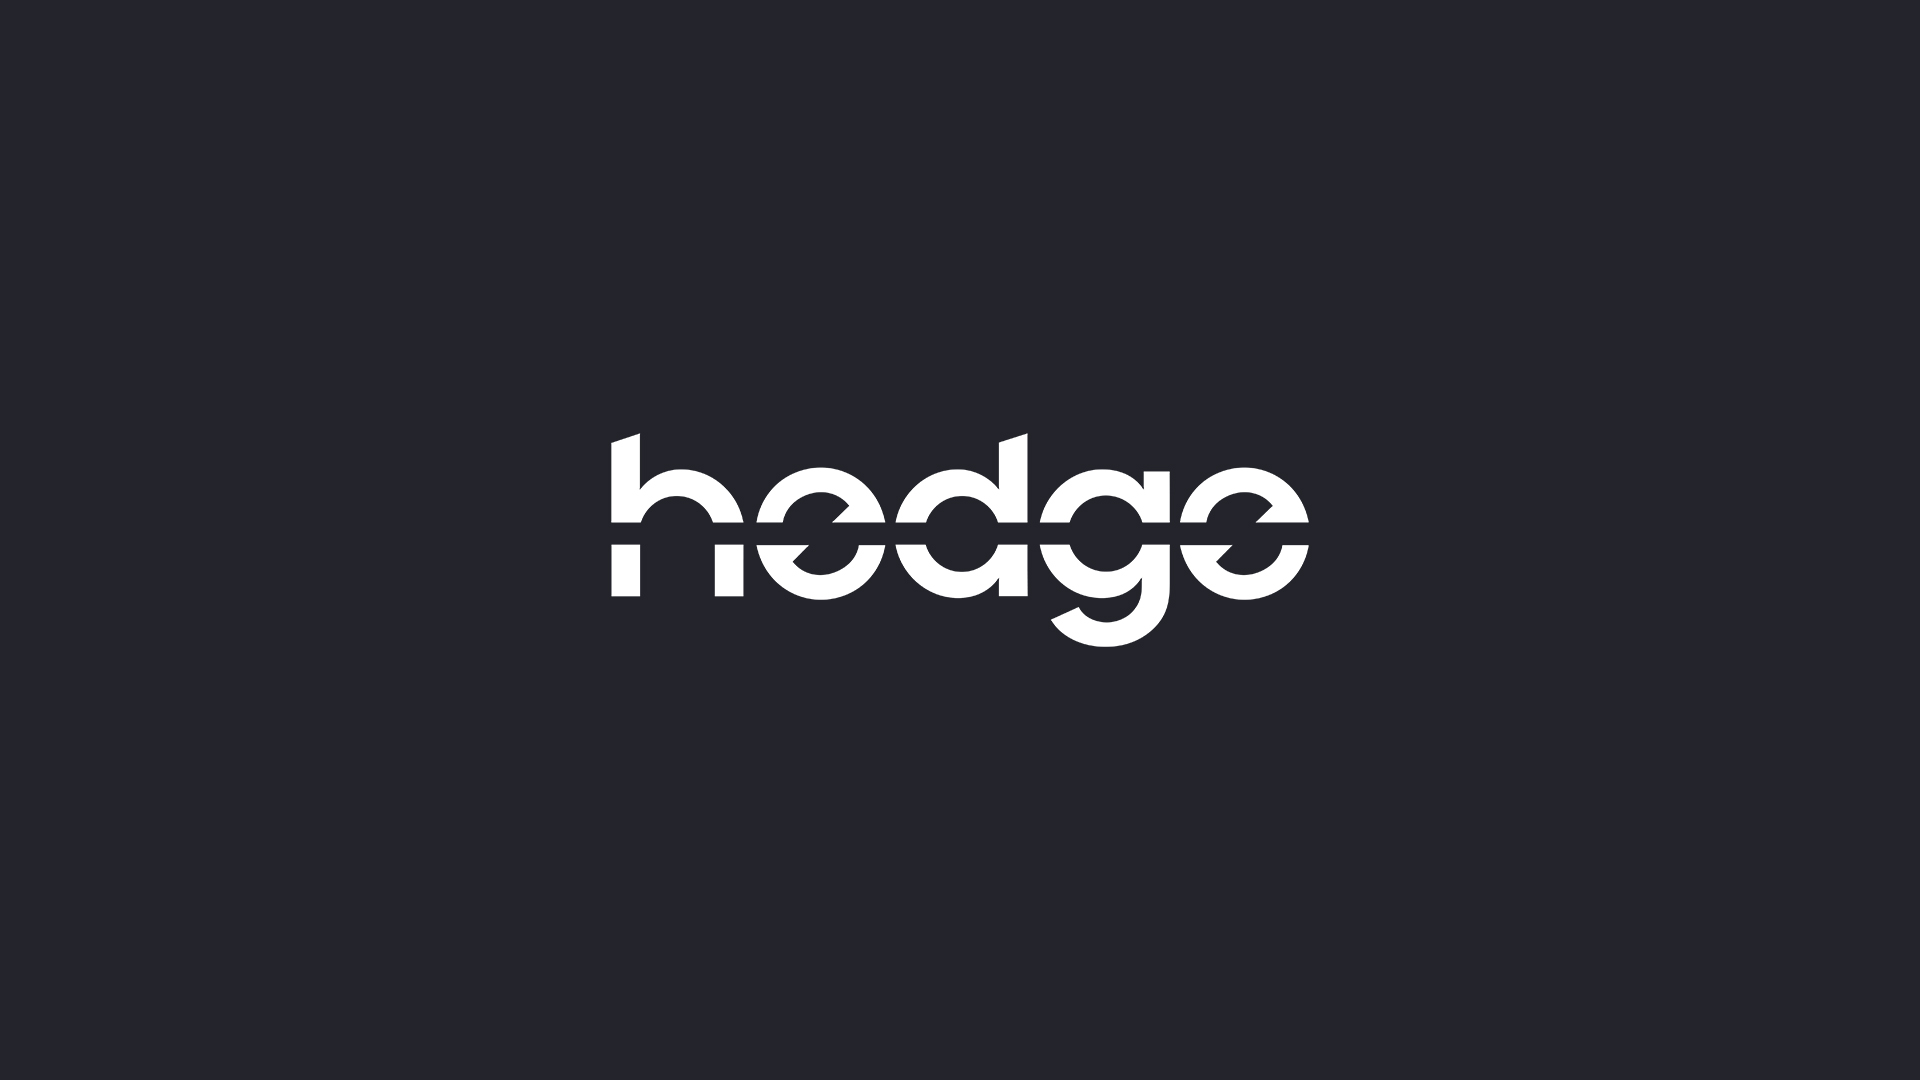 hedge software